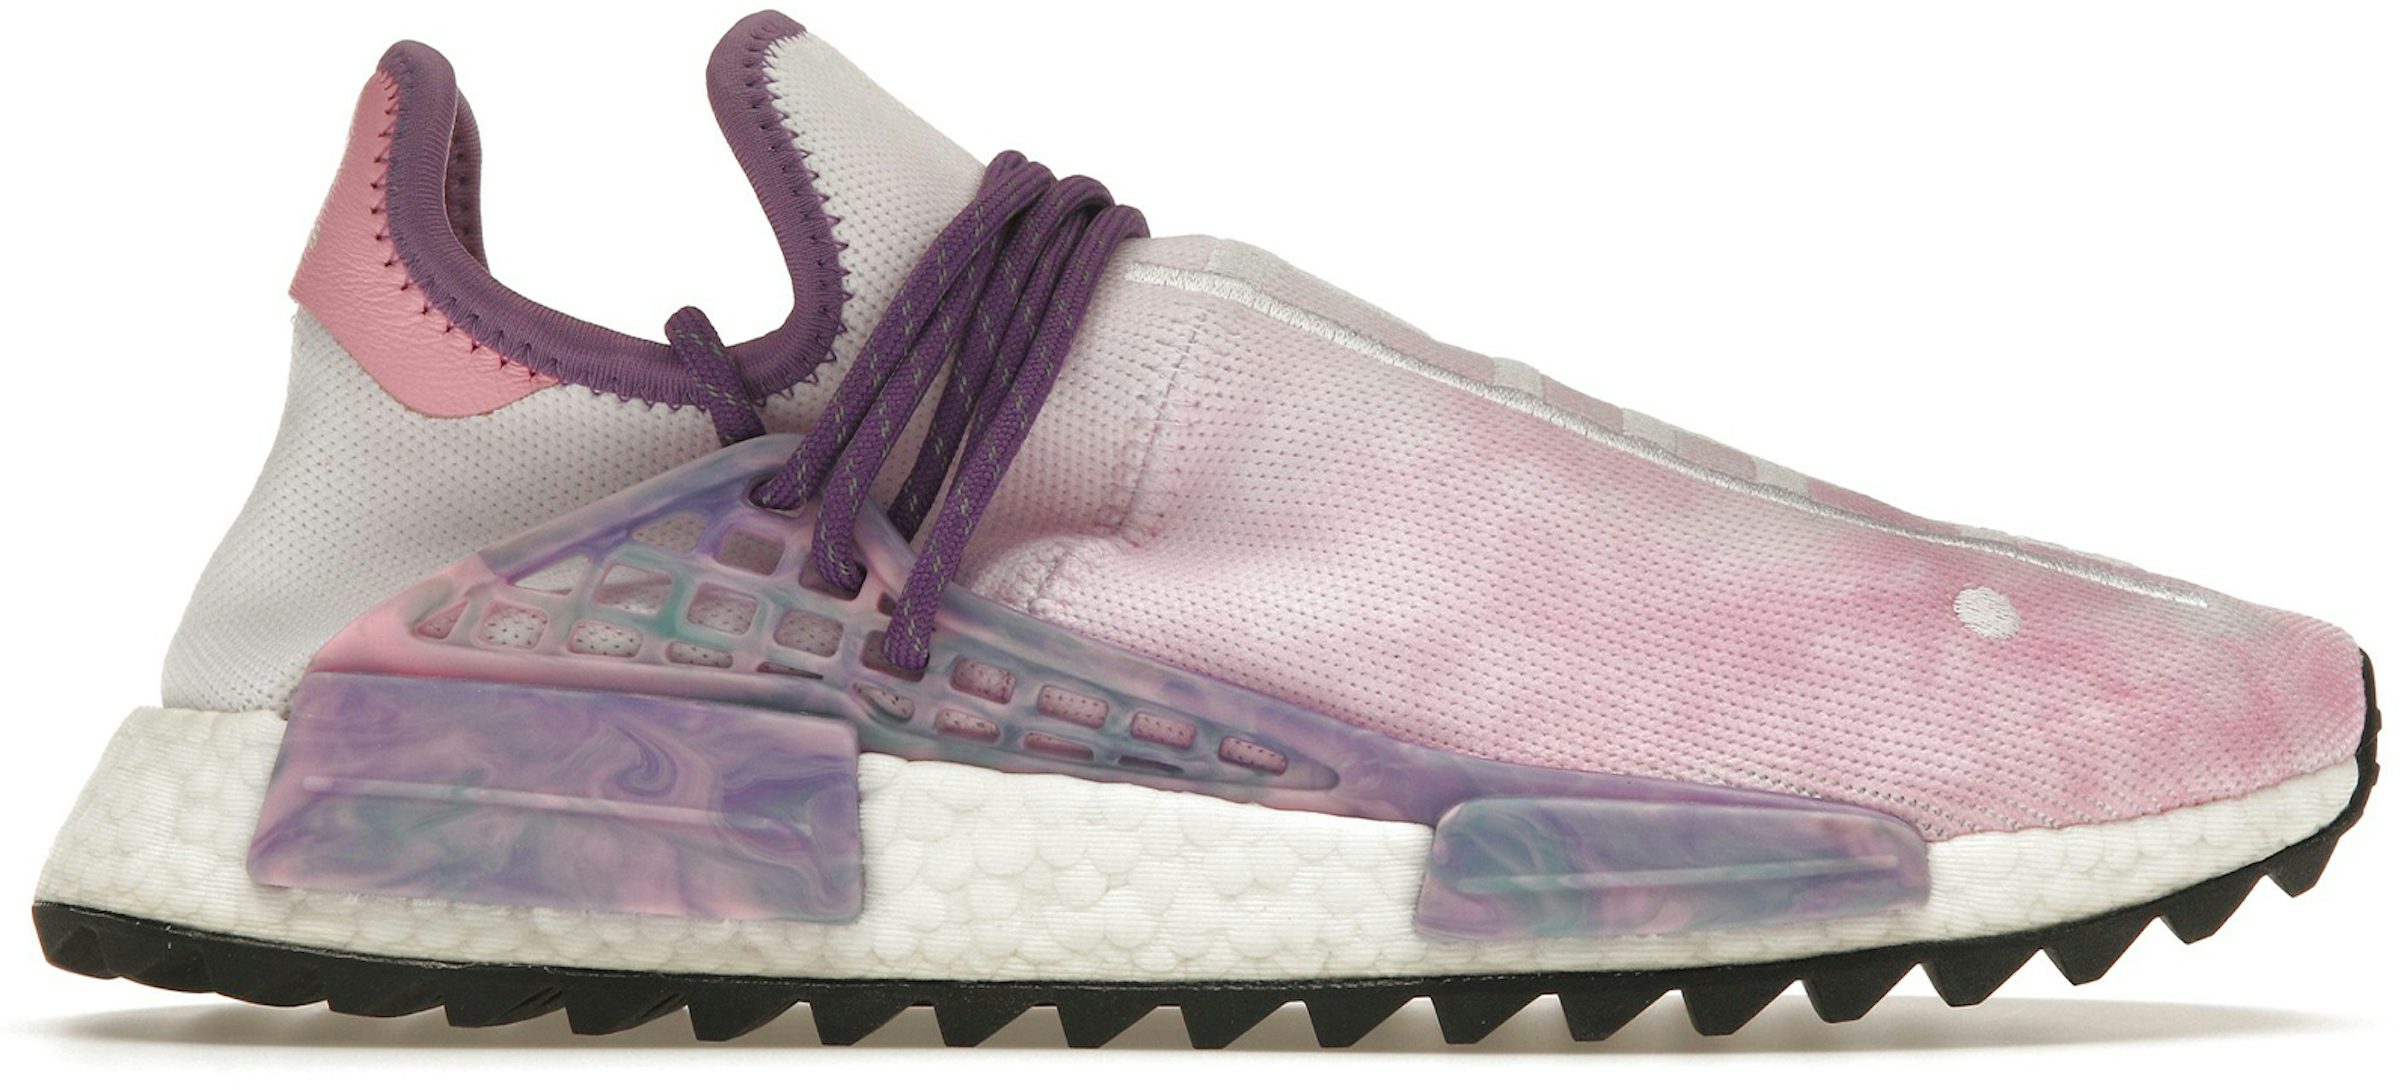 Adidas PW Human Race NMD TR 'Multicolor' Shoes - Size 7.5